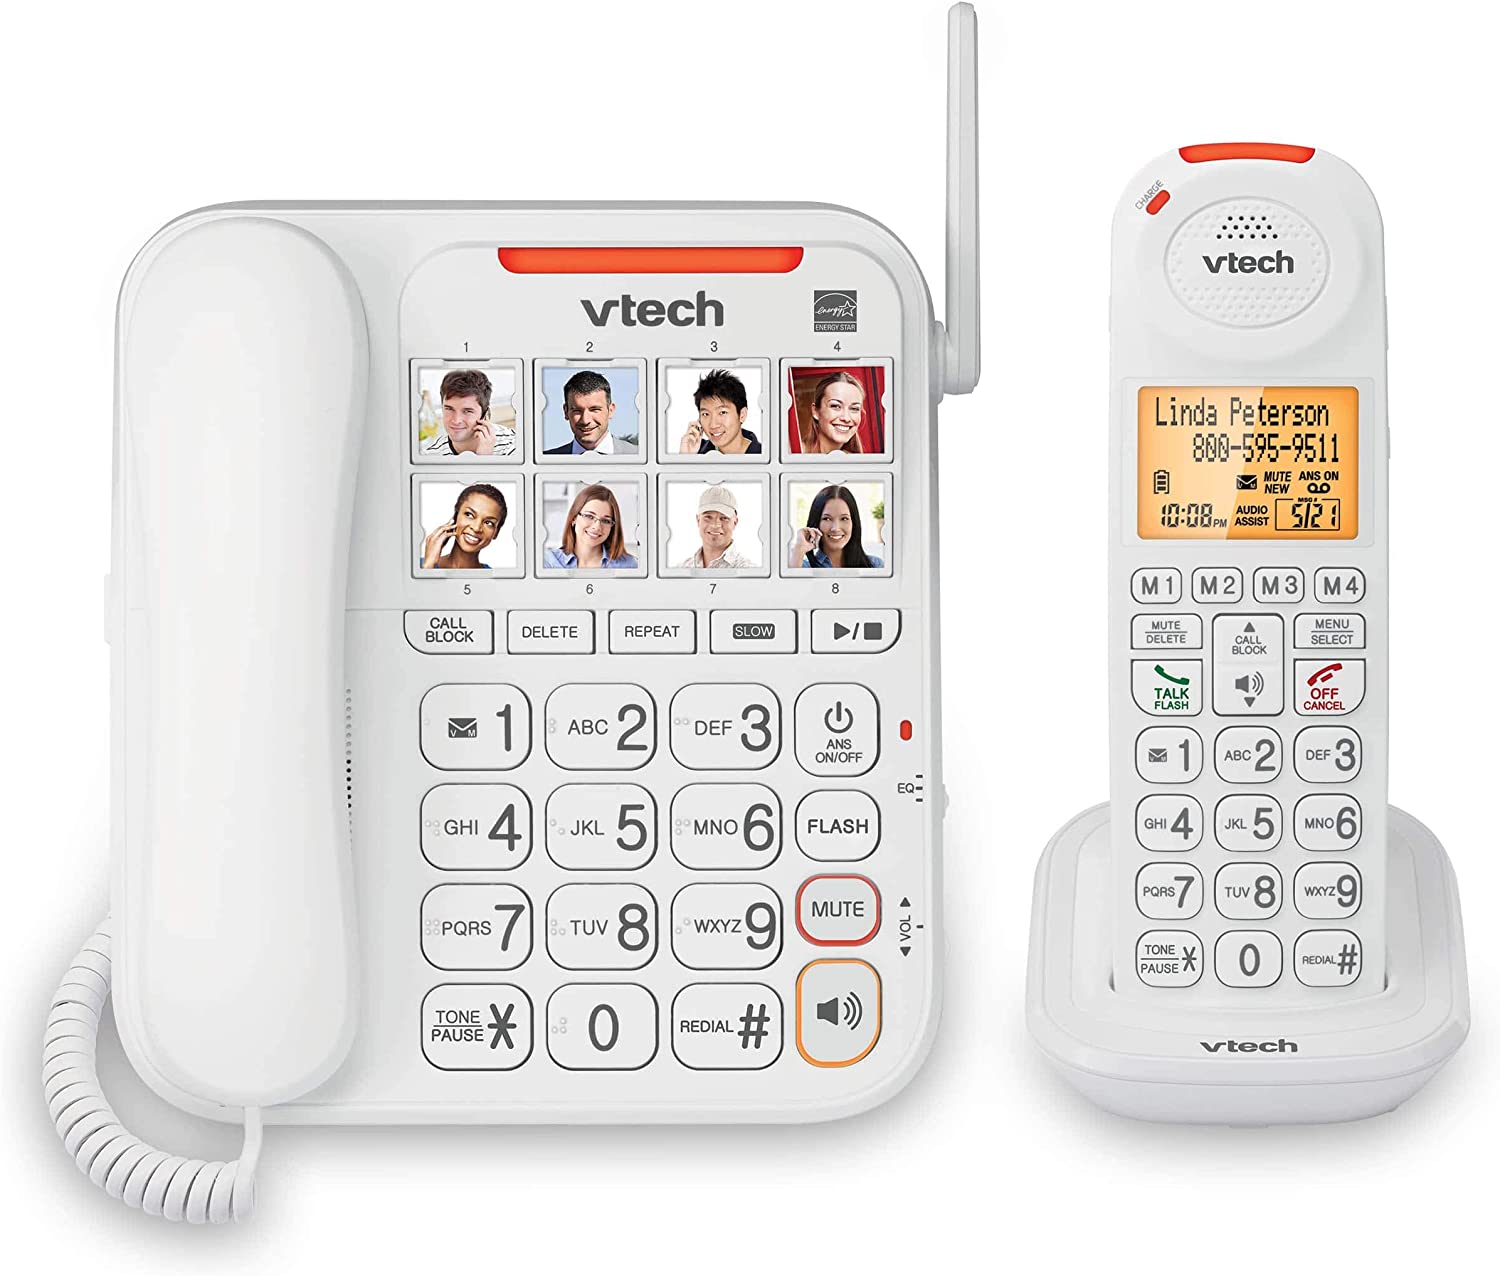 VTech SN5147 Amplified Corded/Cordless Senior Phone with Answering Machine, Call Blocking, 90dB Extra-loud Visual Ringer, One-touch Audio Assist on Handset up to 50dB, Big Buttons and Large Display